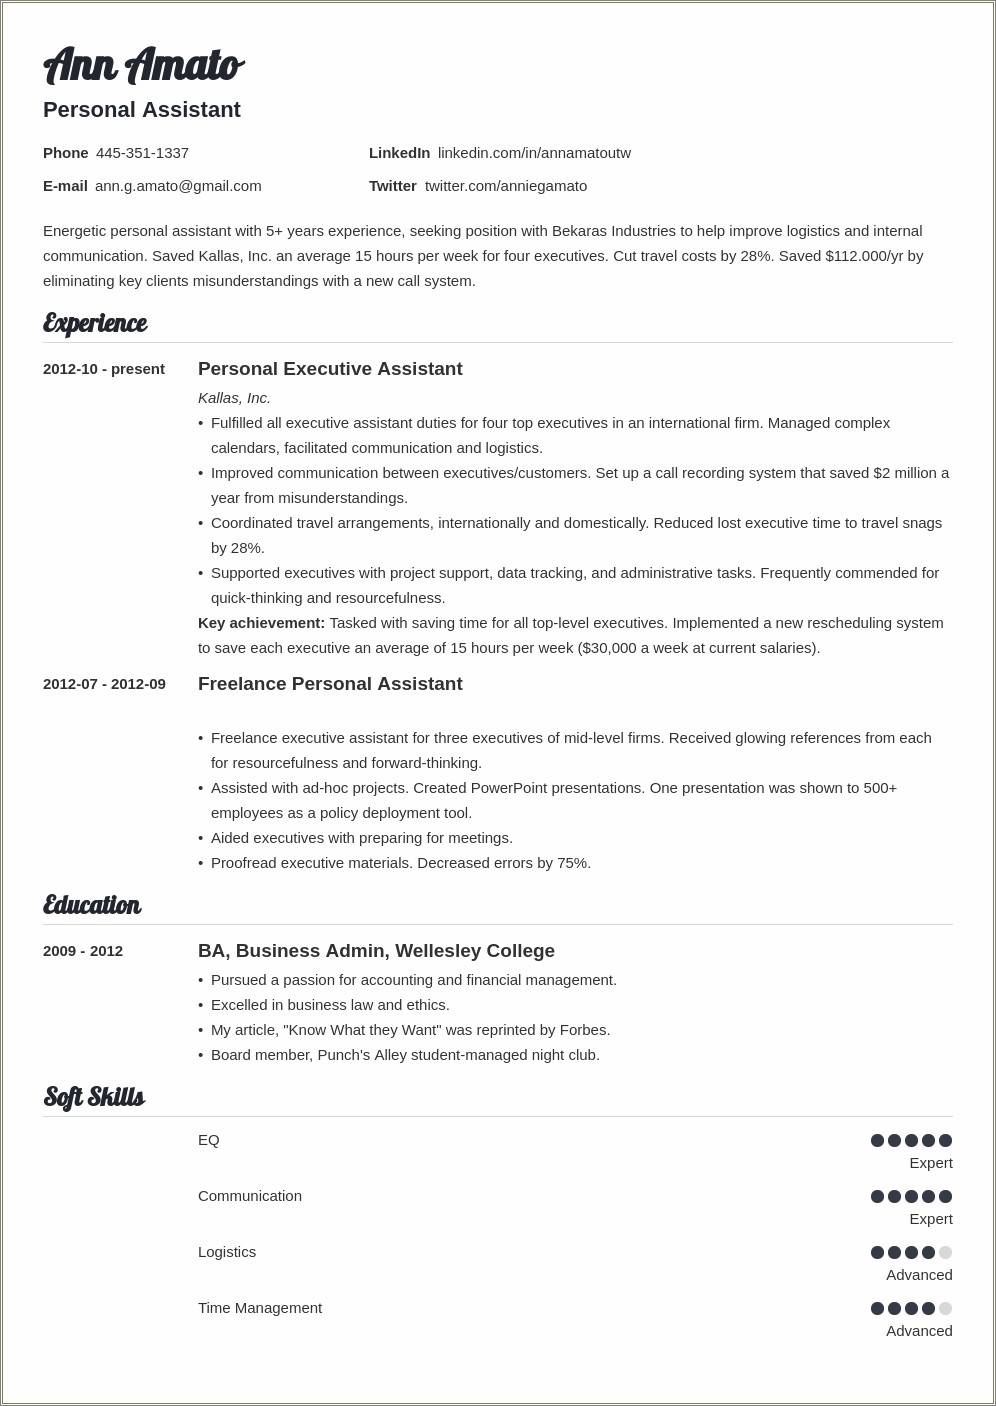 Resume Format Professional 1 Year Experience